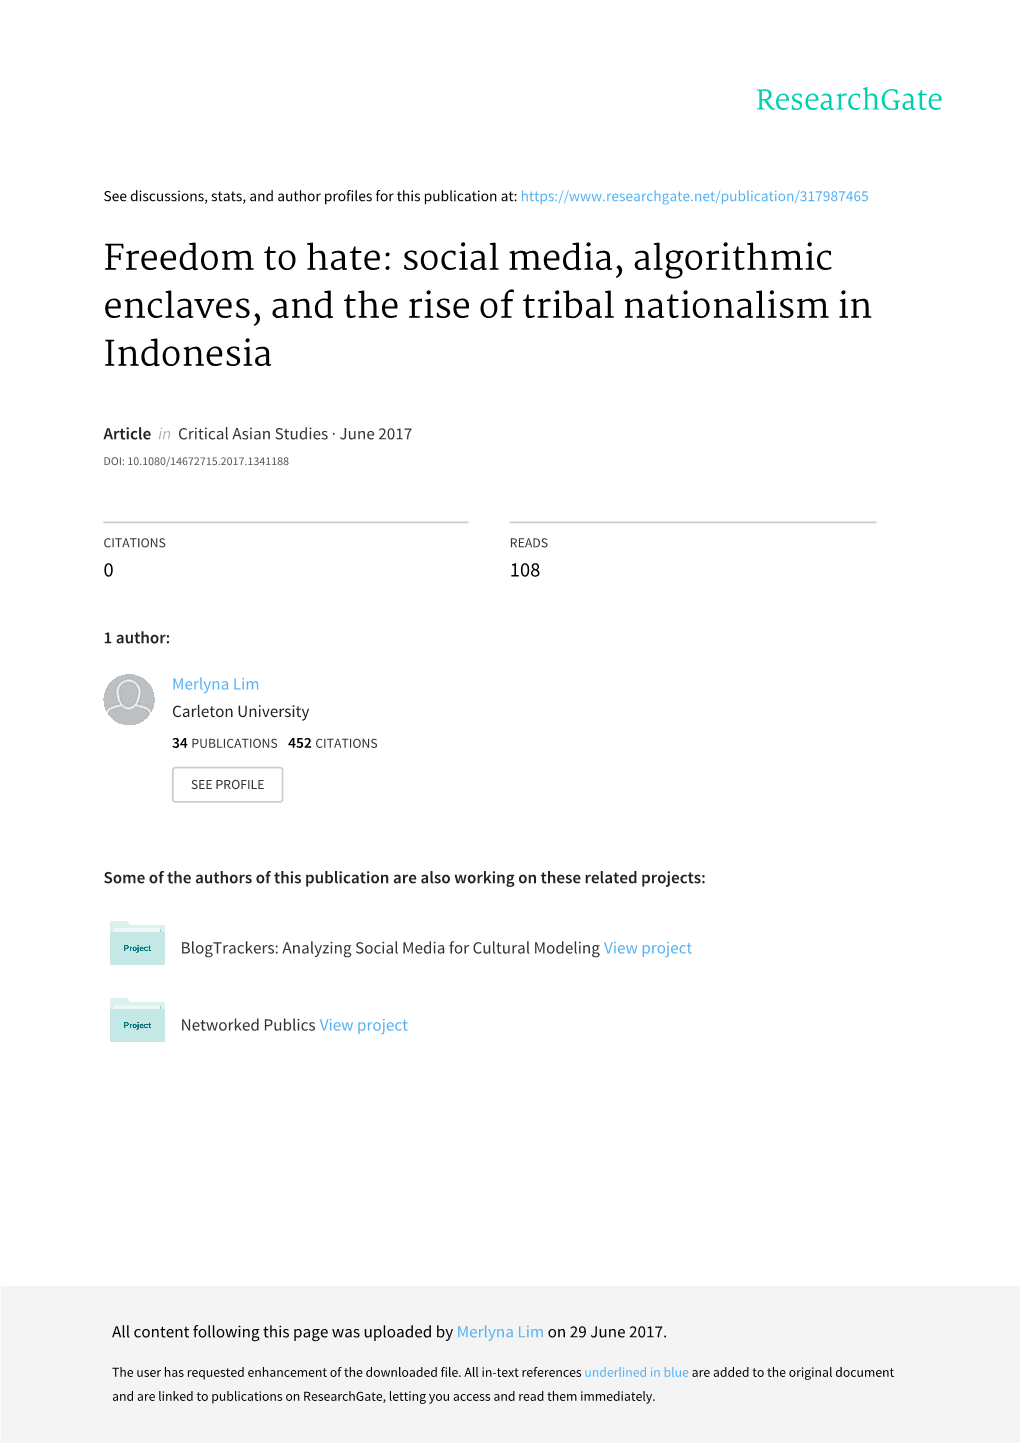 Freedom to Hate: Social Media, Algorithmic Enclaves, and the Rise of Tribal Nationalism in Indonesia